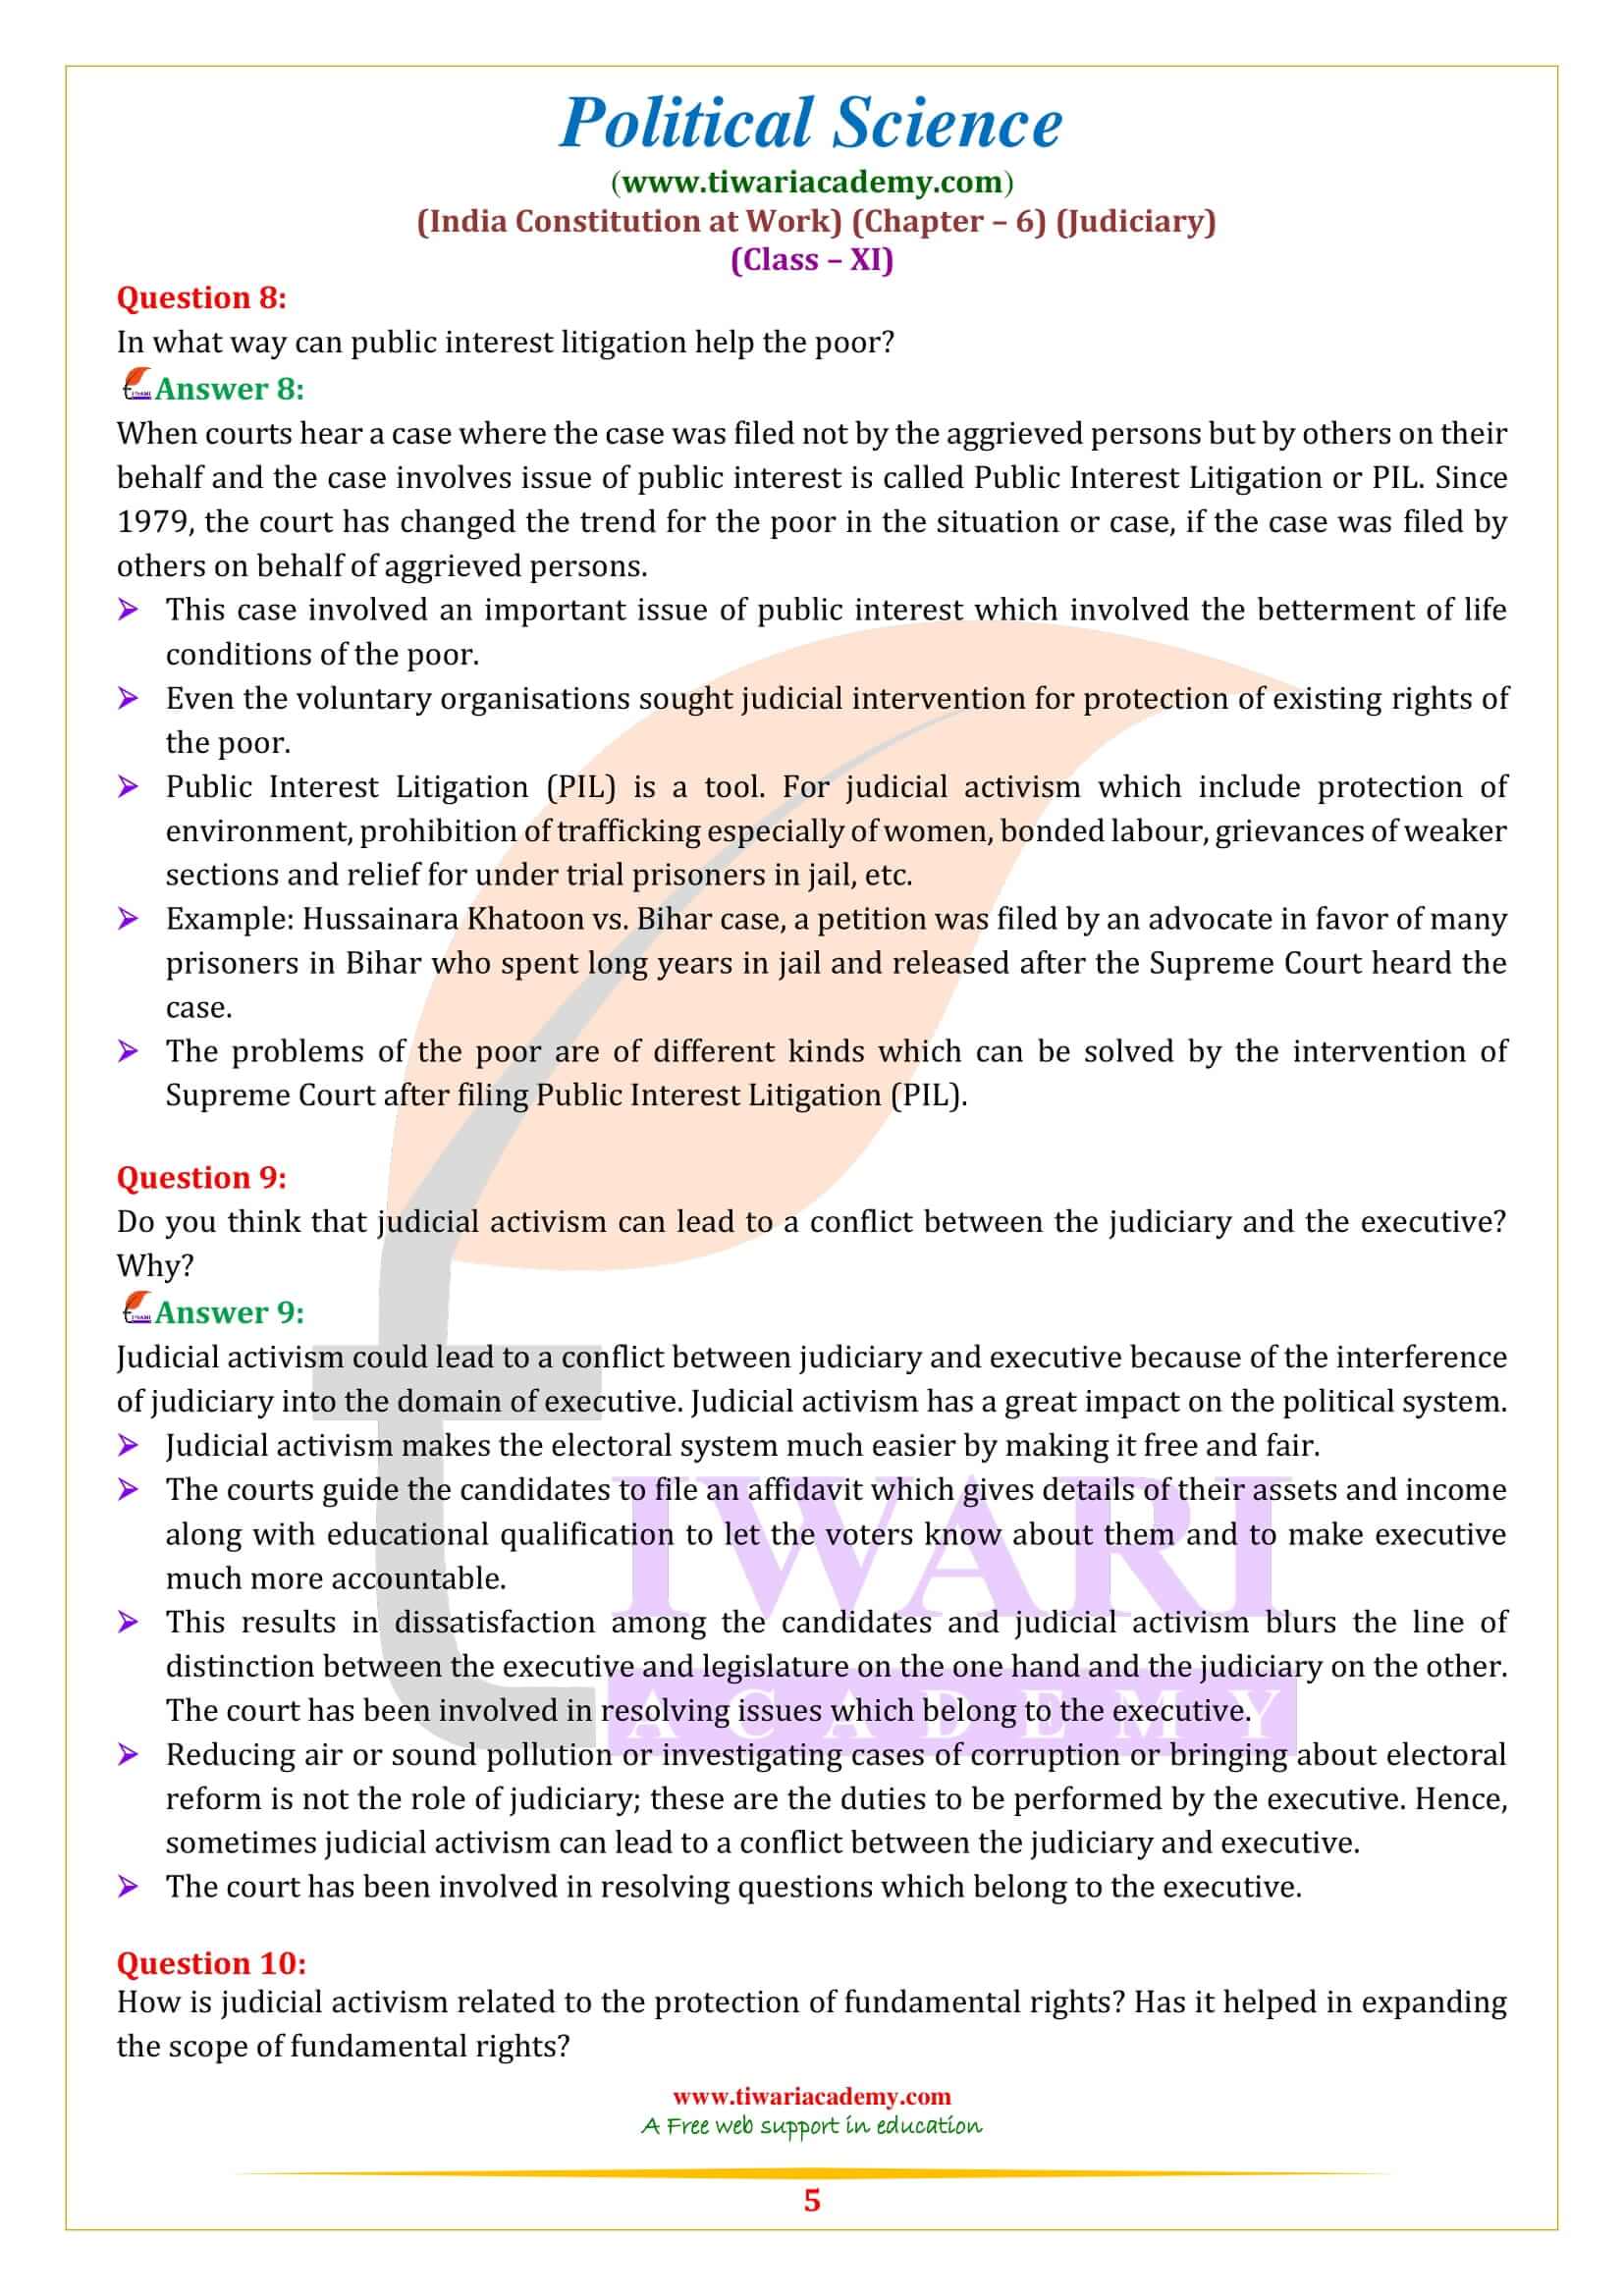 NCERT Solutions for Class 11 Political Science Chapter 6 download